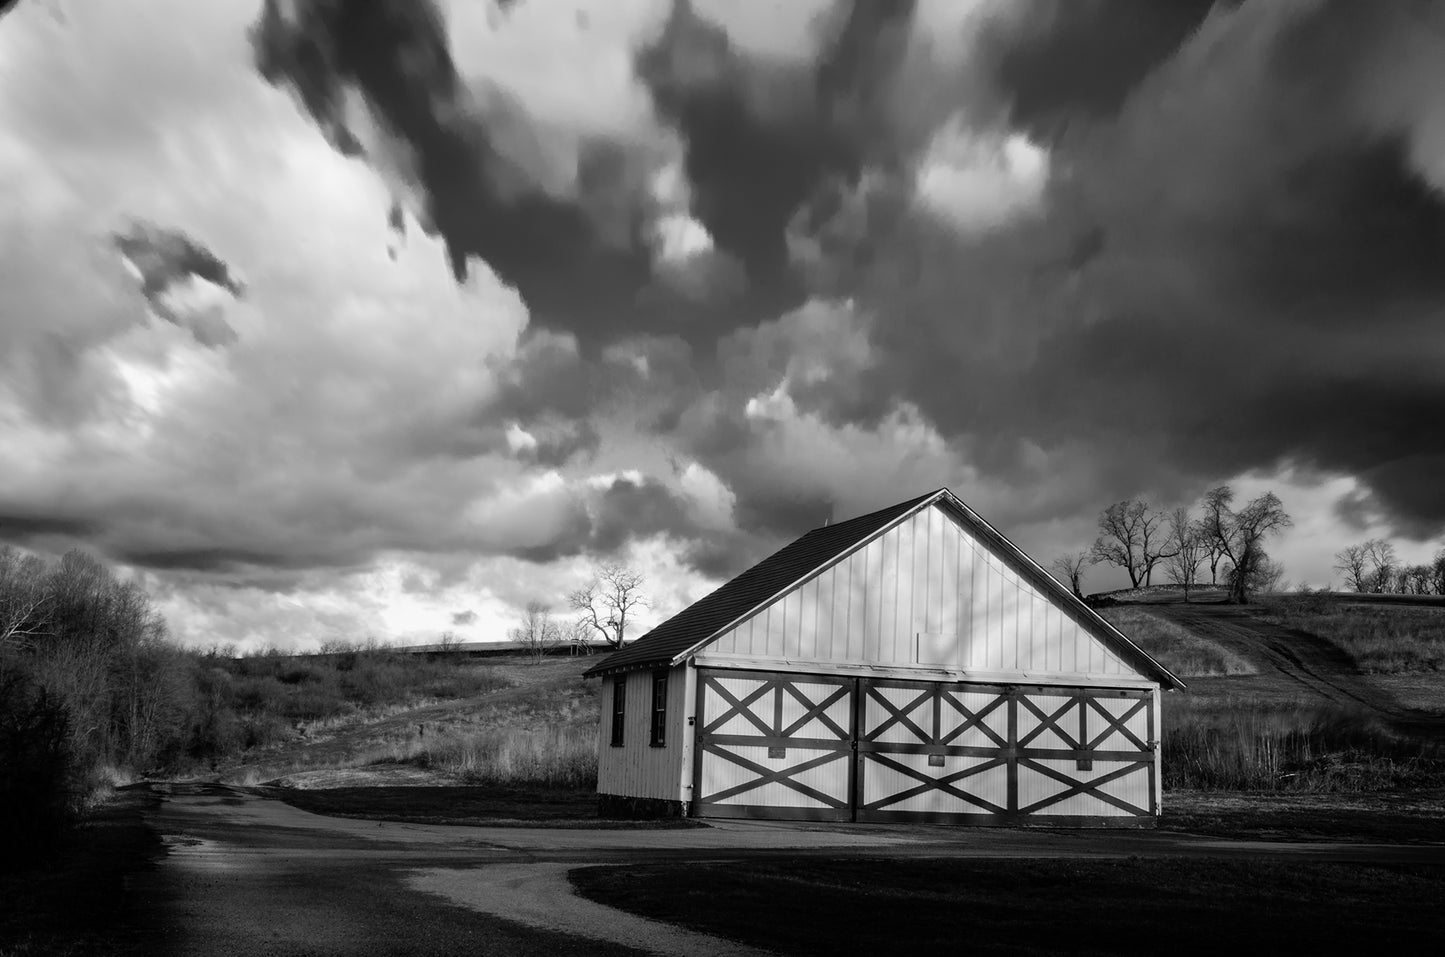 Artwork Prints: Aging Barn in the Morning Sun Black and White - Rural / Country / Farmhouse Style Landscape / Nature Photograph Canvas Wall Art Print - Wall Decor - Artwork